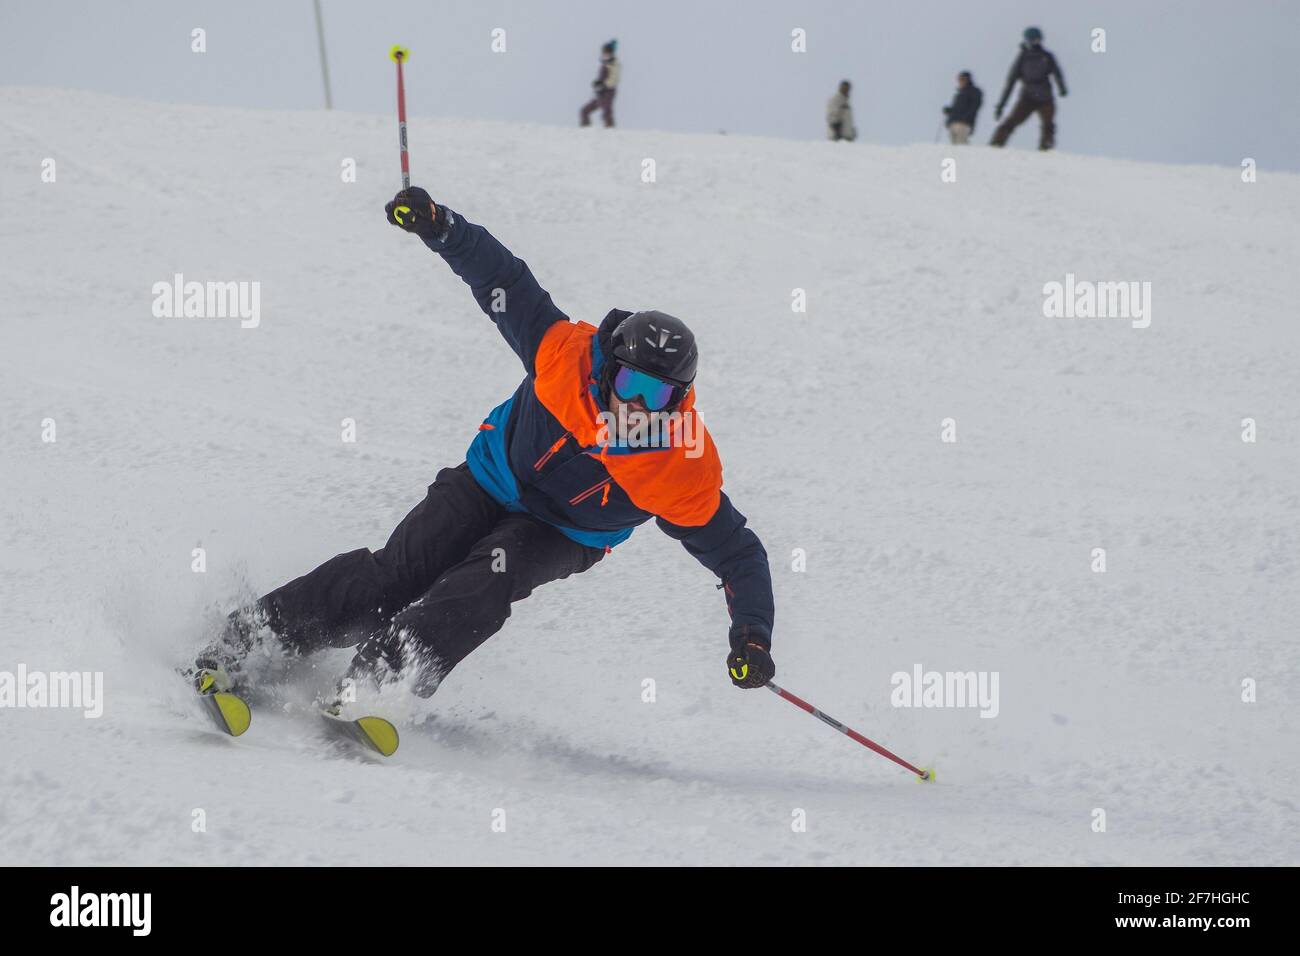 A man agressively skiing towards the camera on a ski slope in cloudy conditions. Stock Photo